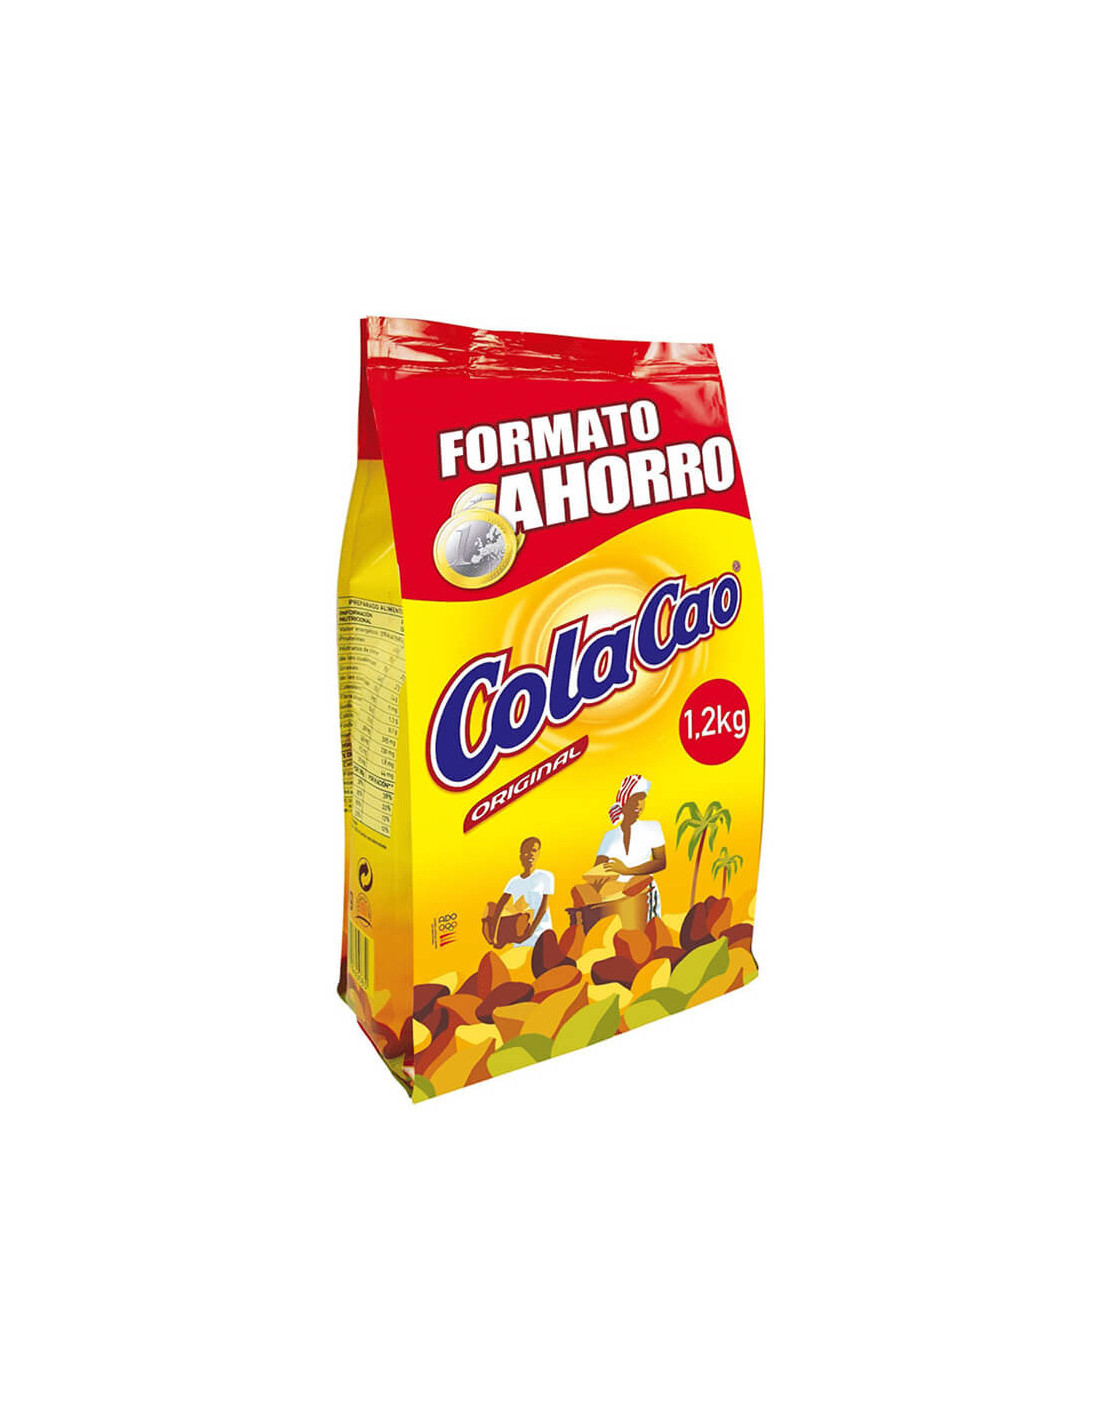 Online Store sell Cola Cao original 3 kg